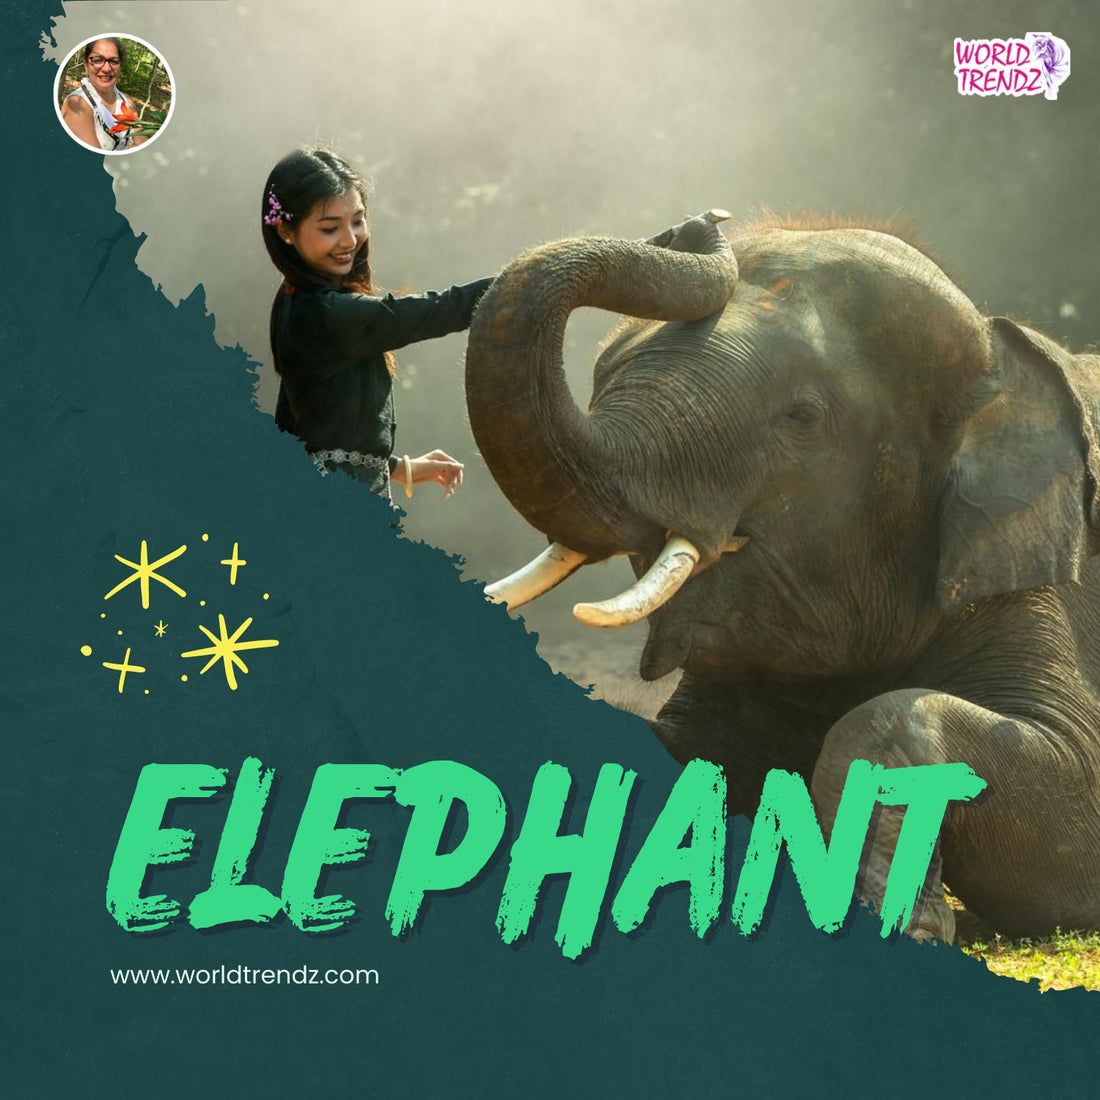 The Next Big Thing in Elephant